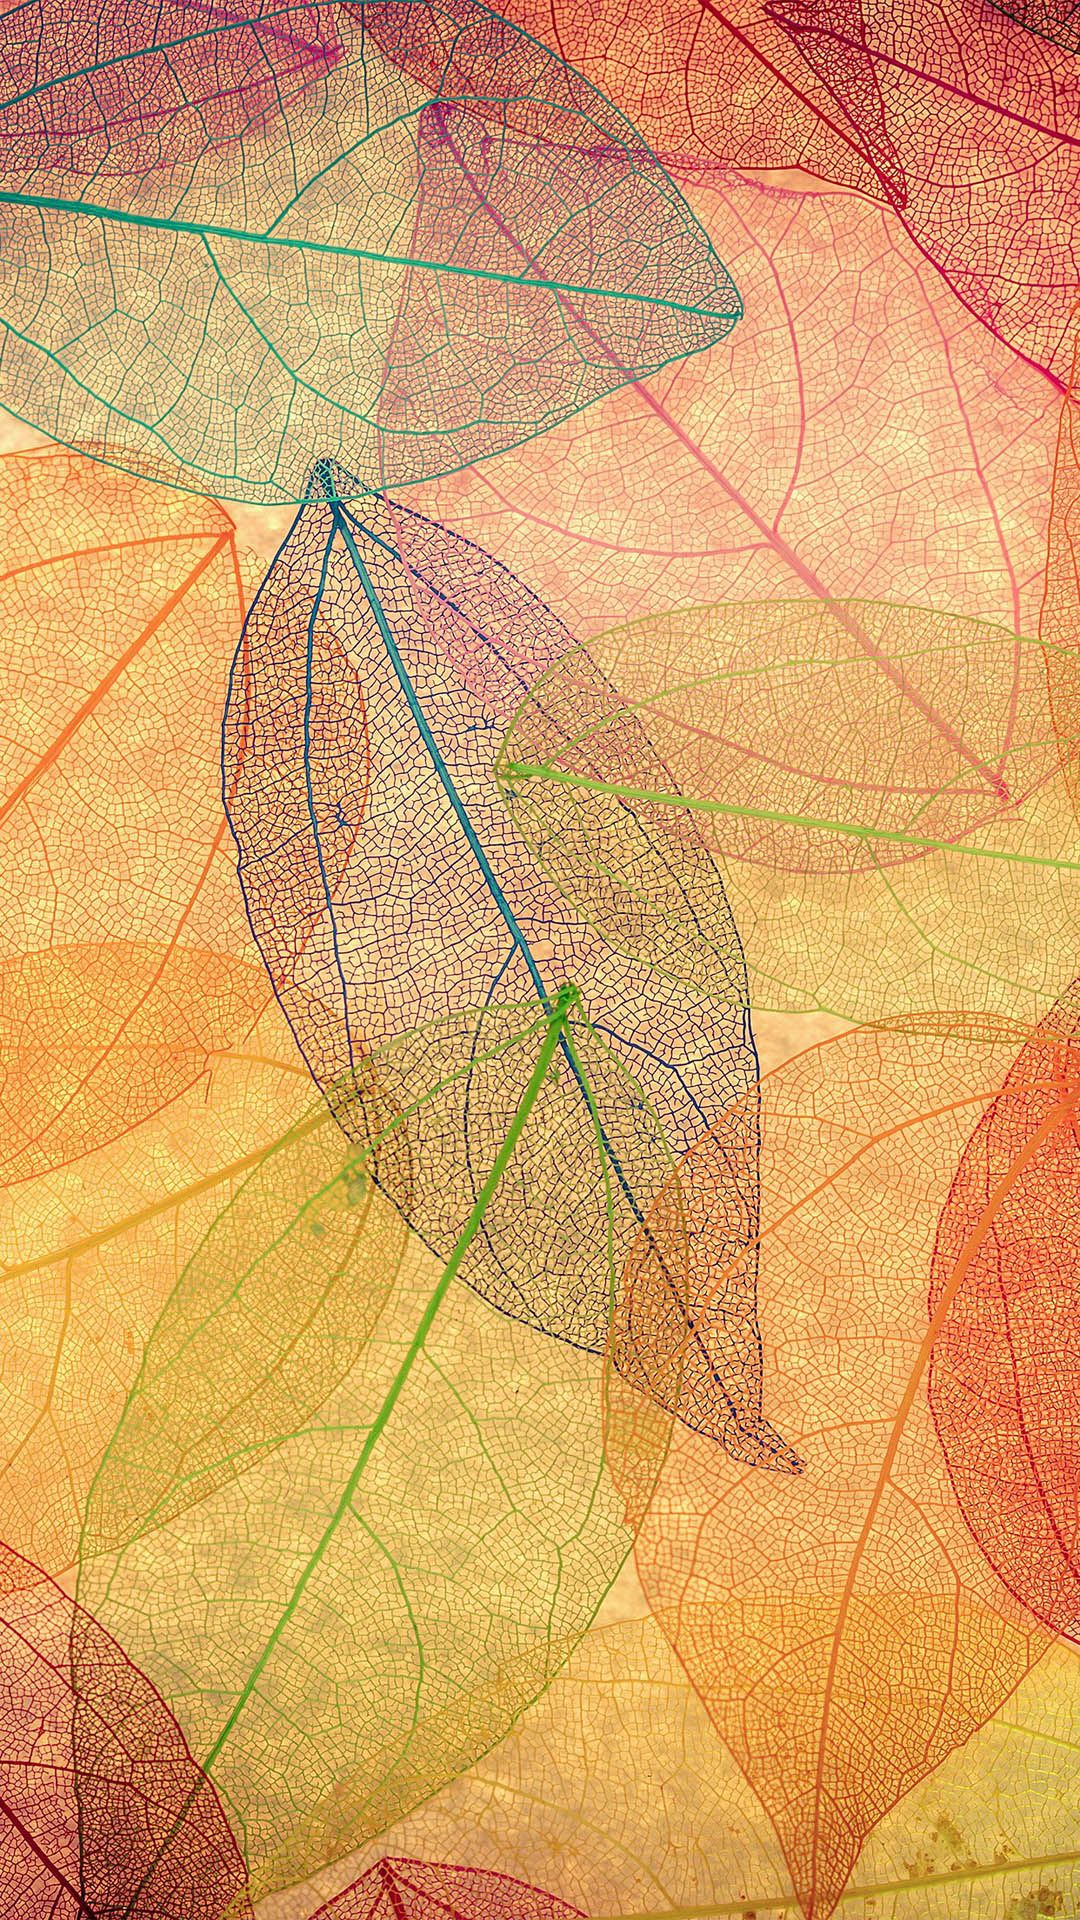 Leaf Live Wallpaper, Android wallpaper, Android themes